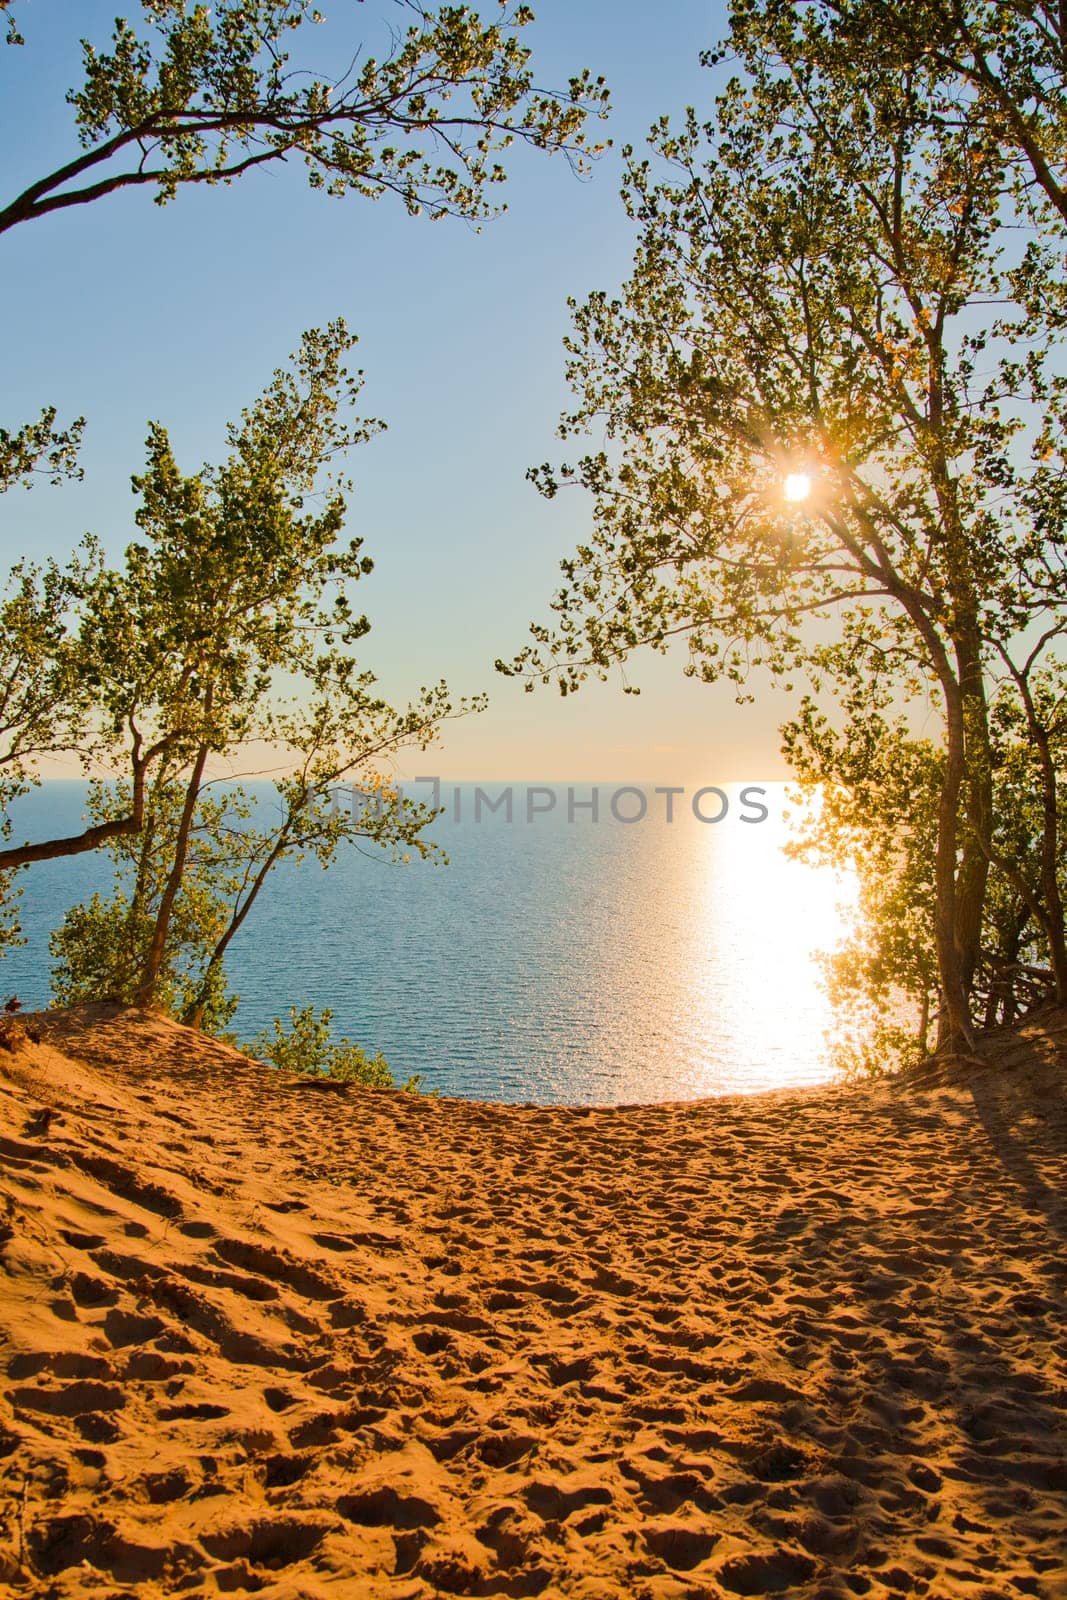 Golden Hour Serenity at Michigan Sand Dunes Overlooking Tranquil Waters by njproductions